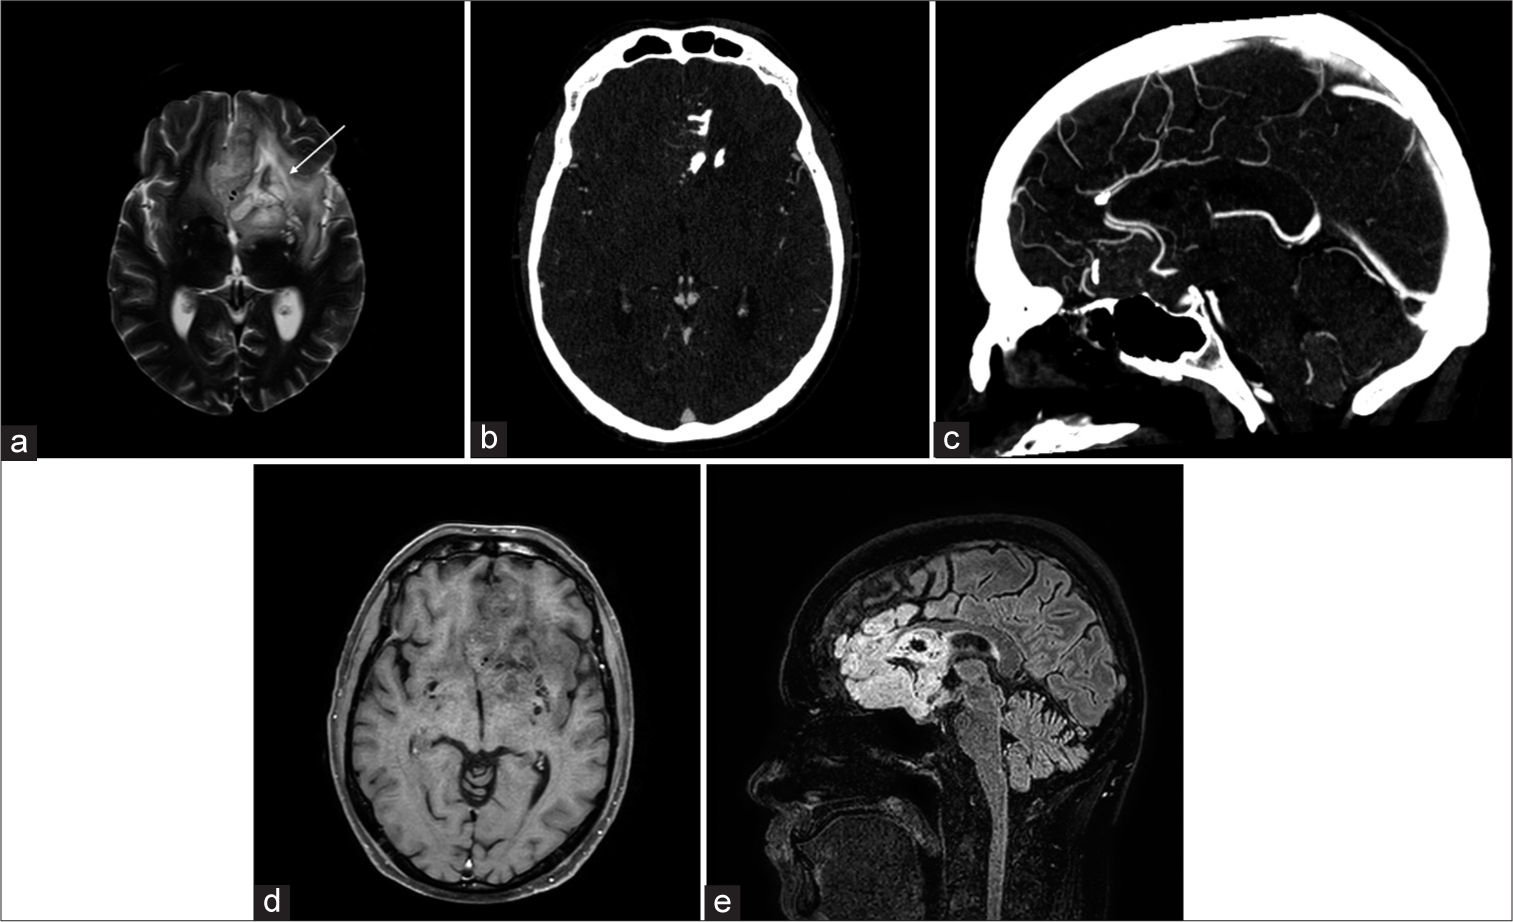 A 39-year-old male with anaplastic oligodendroglioma, with 1p/19q codeleted, IDH mutation. (a) Axial T2-weighted image shows a left frontal mass which encases the traversing bilateral anterior cerebral arteries (white arrow). (b) Axial and (c) sagittal computed tomography angiogram demonstrates characteristics internal calcifications in the mass and confirms the presence of ACAs medially. The ACA flow voids are also evident on the (d) axial T1+C and (e) sagittal FLAIR images. IDH: isocitrate dehydrogenase, ACA: Anterior cerebral artery, FLAIR: Fluid-attenuated inversion recovery.